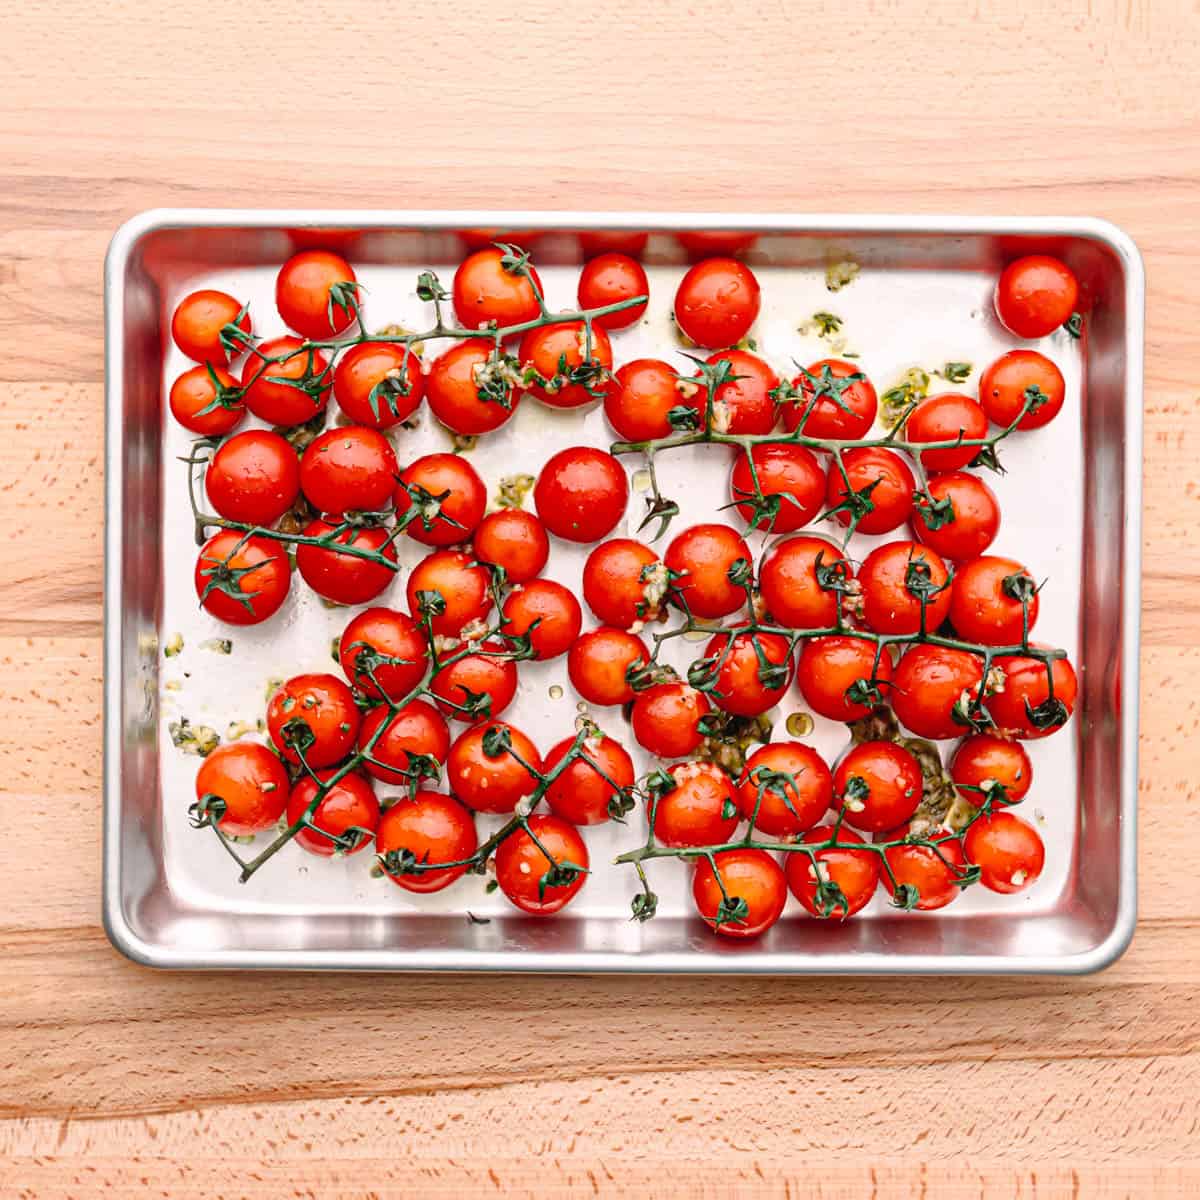 Place the tomatoes on a baking sheet then drizzle with the oil mixture.